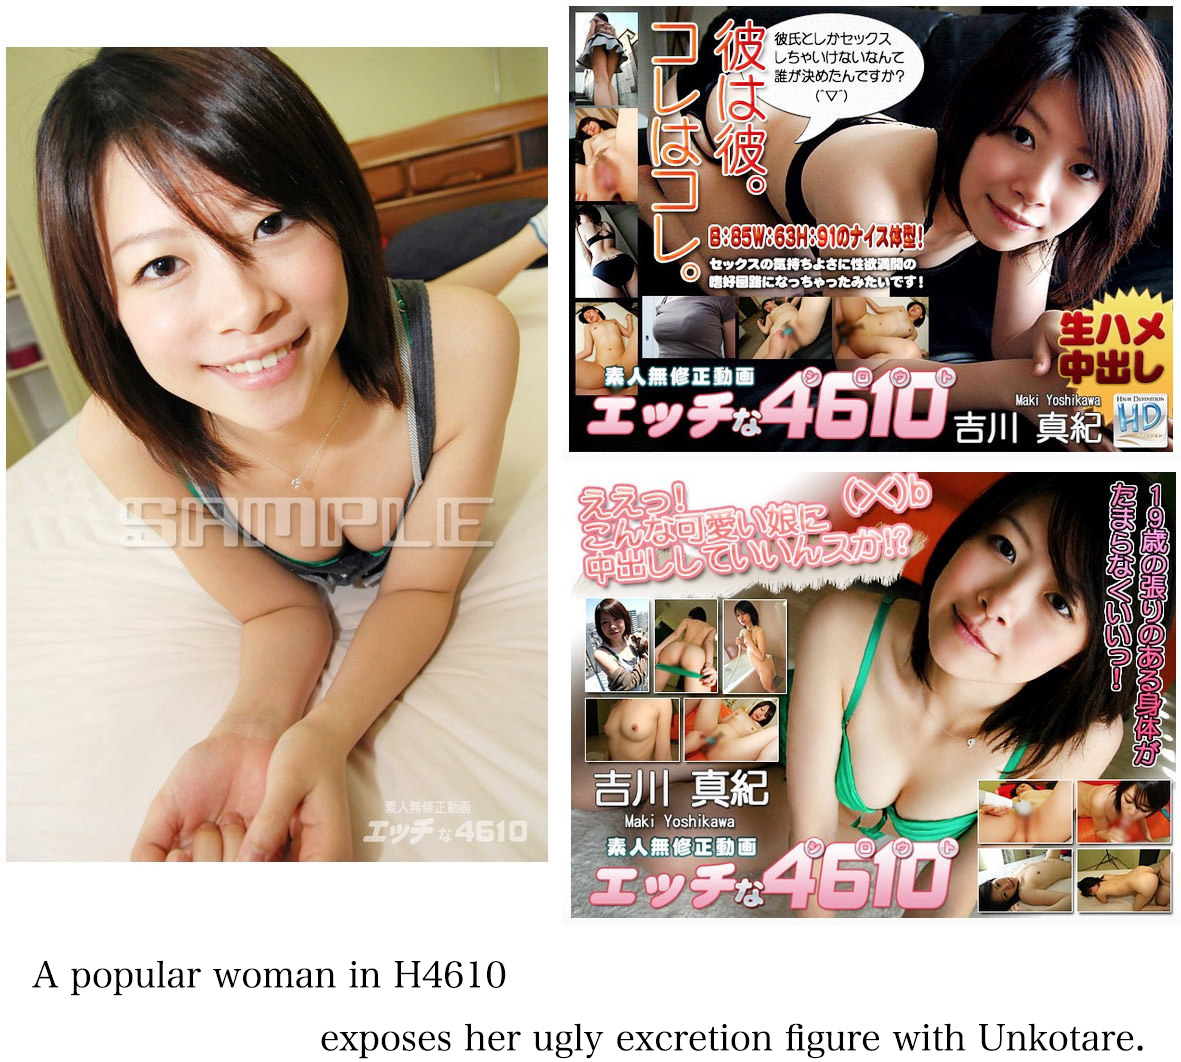 A popular woman in H4610 exposes her ugly excretion figure with Unkotare.